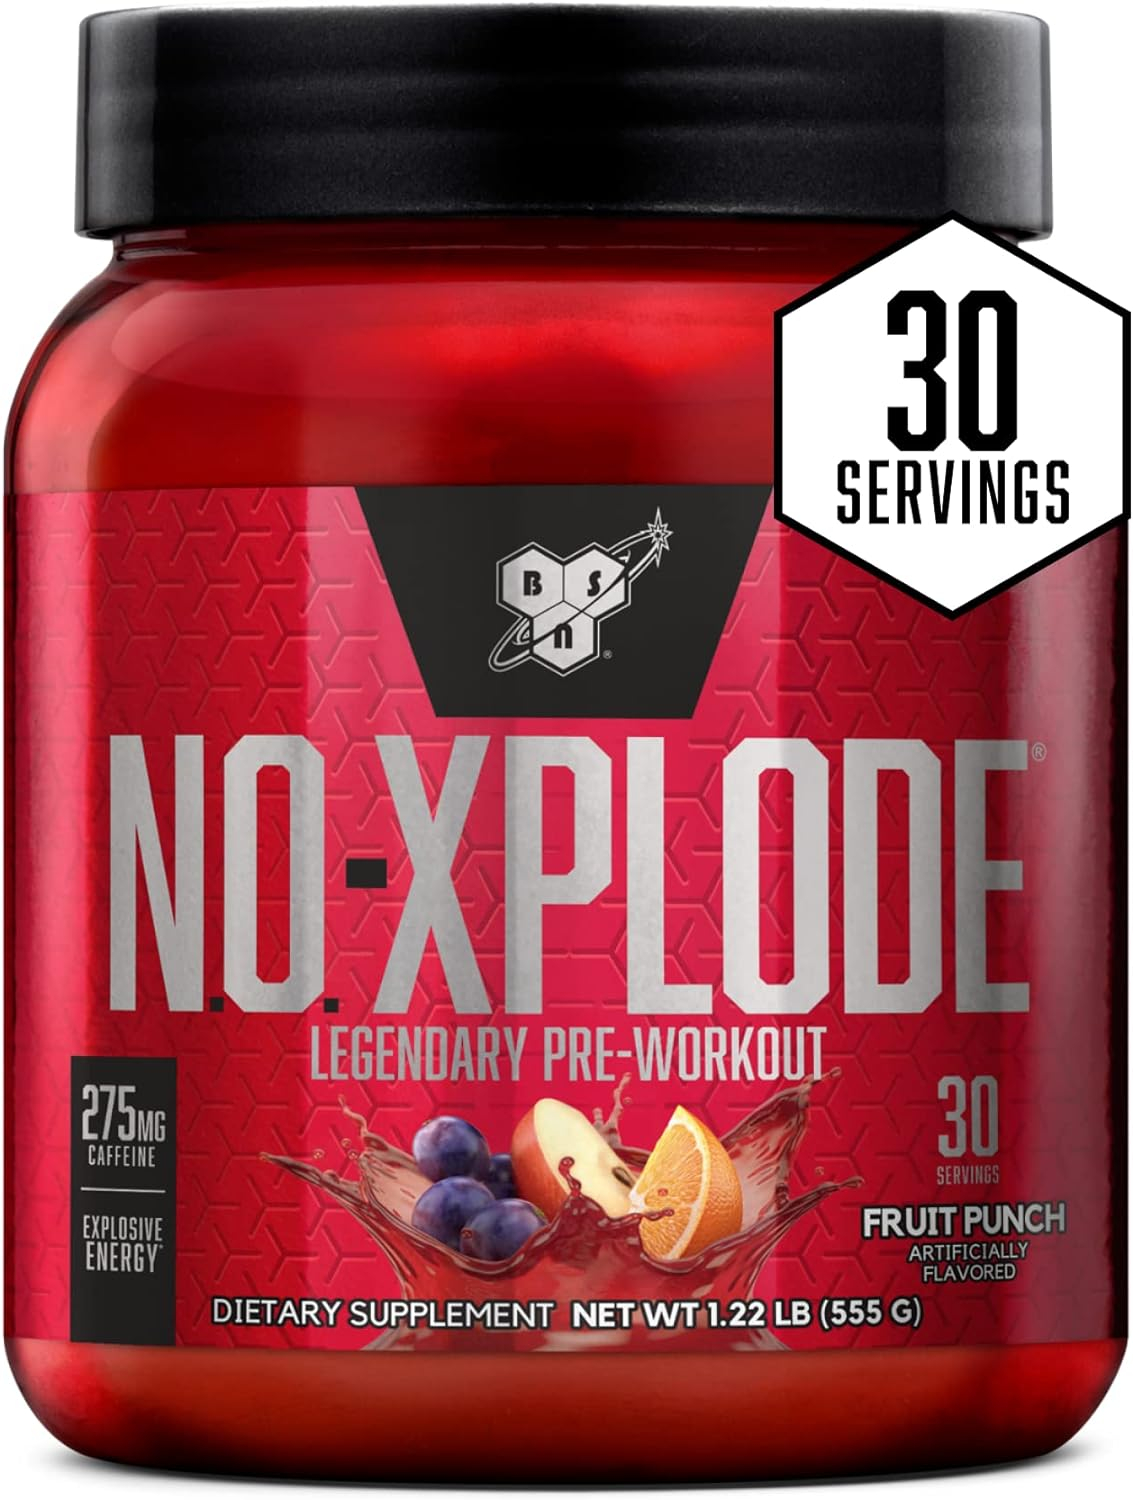 BSN N.O.-XPLODE Pre Workout Powder, Energy Supplement for Men and Women with Creatine and Beta-Alanine, Flavor: Fruit Punch, 30 Servings